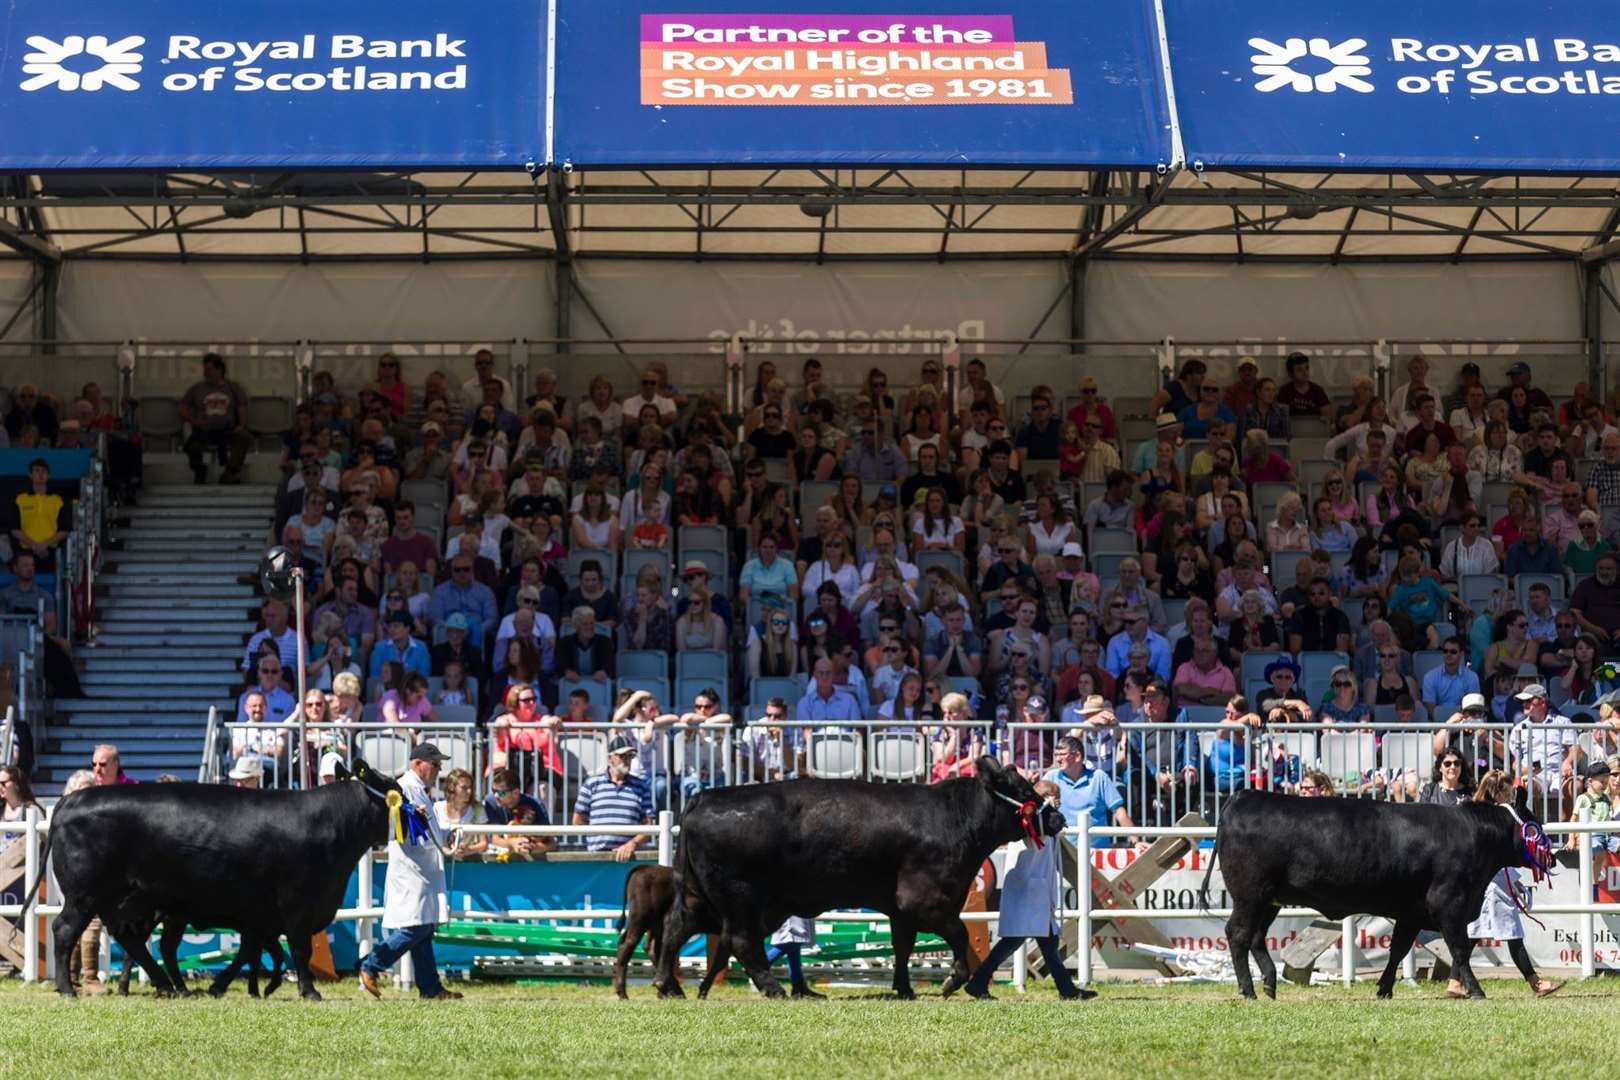 The cattle parade at the Royal Highland Show.